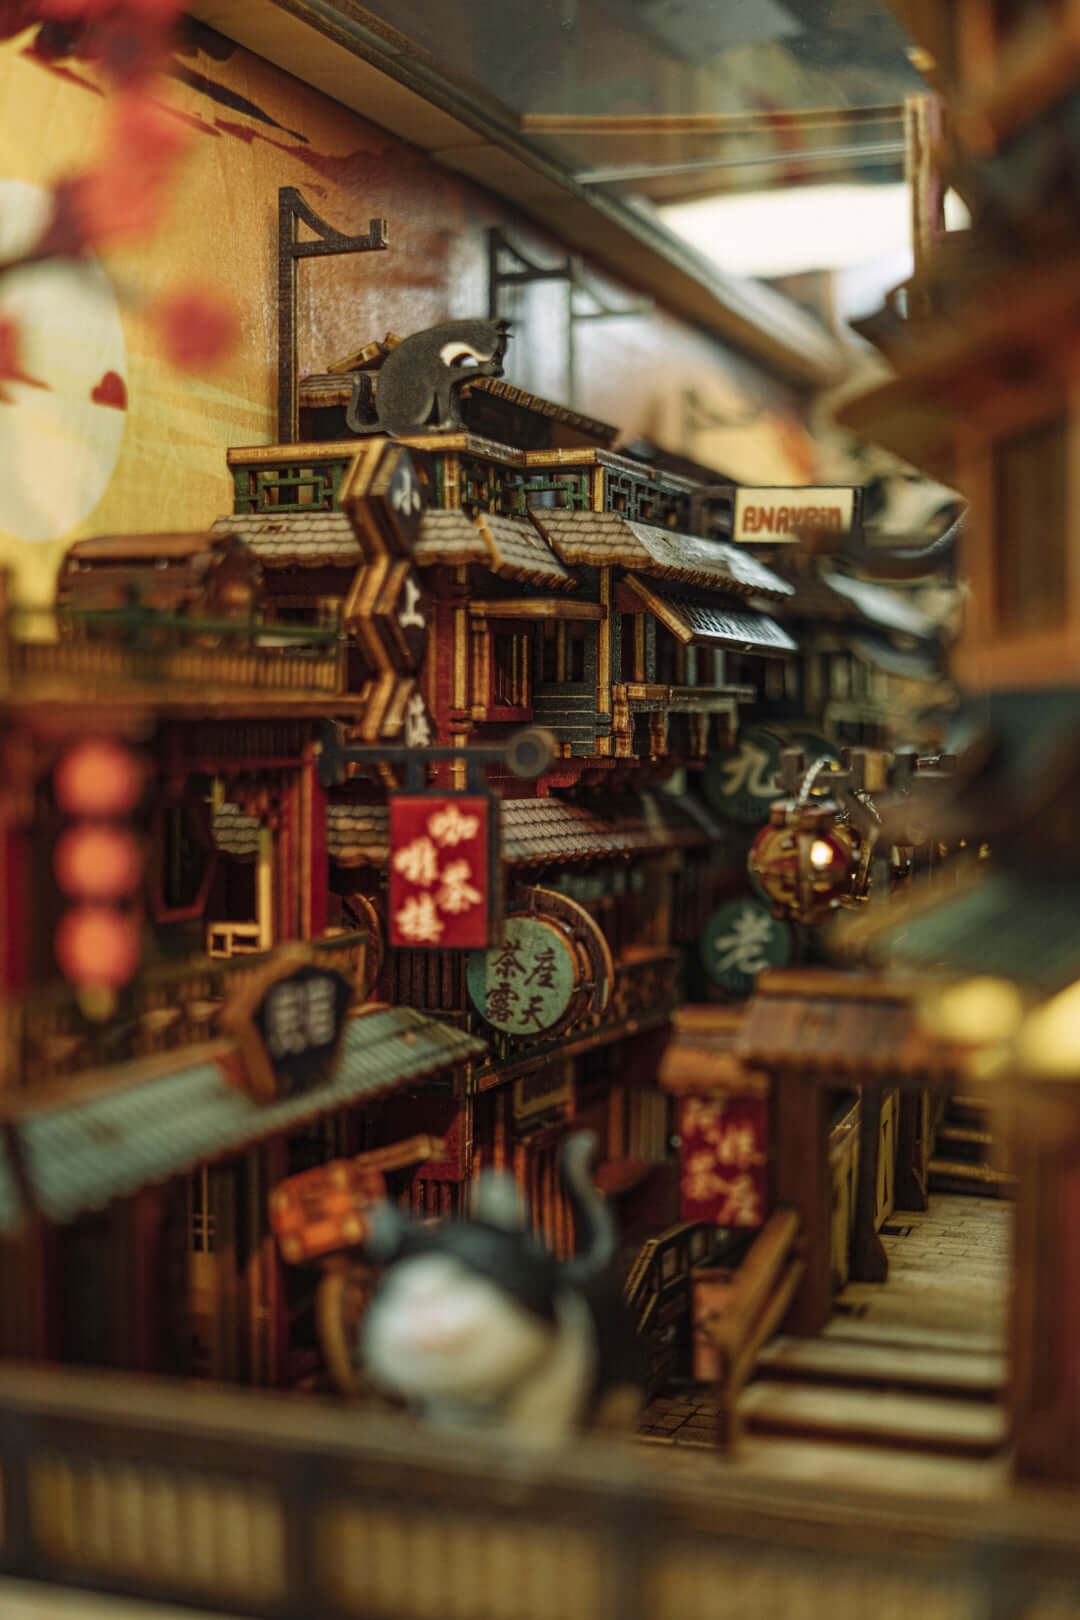 JiuFen Old Street DIY book nook kit showcasing charming storefronts, cherry blossoms, vibrant lanterns, and traditional Chinese roof tiles.